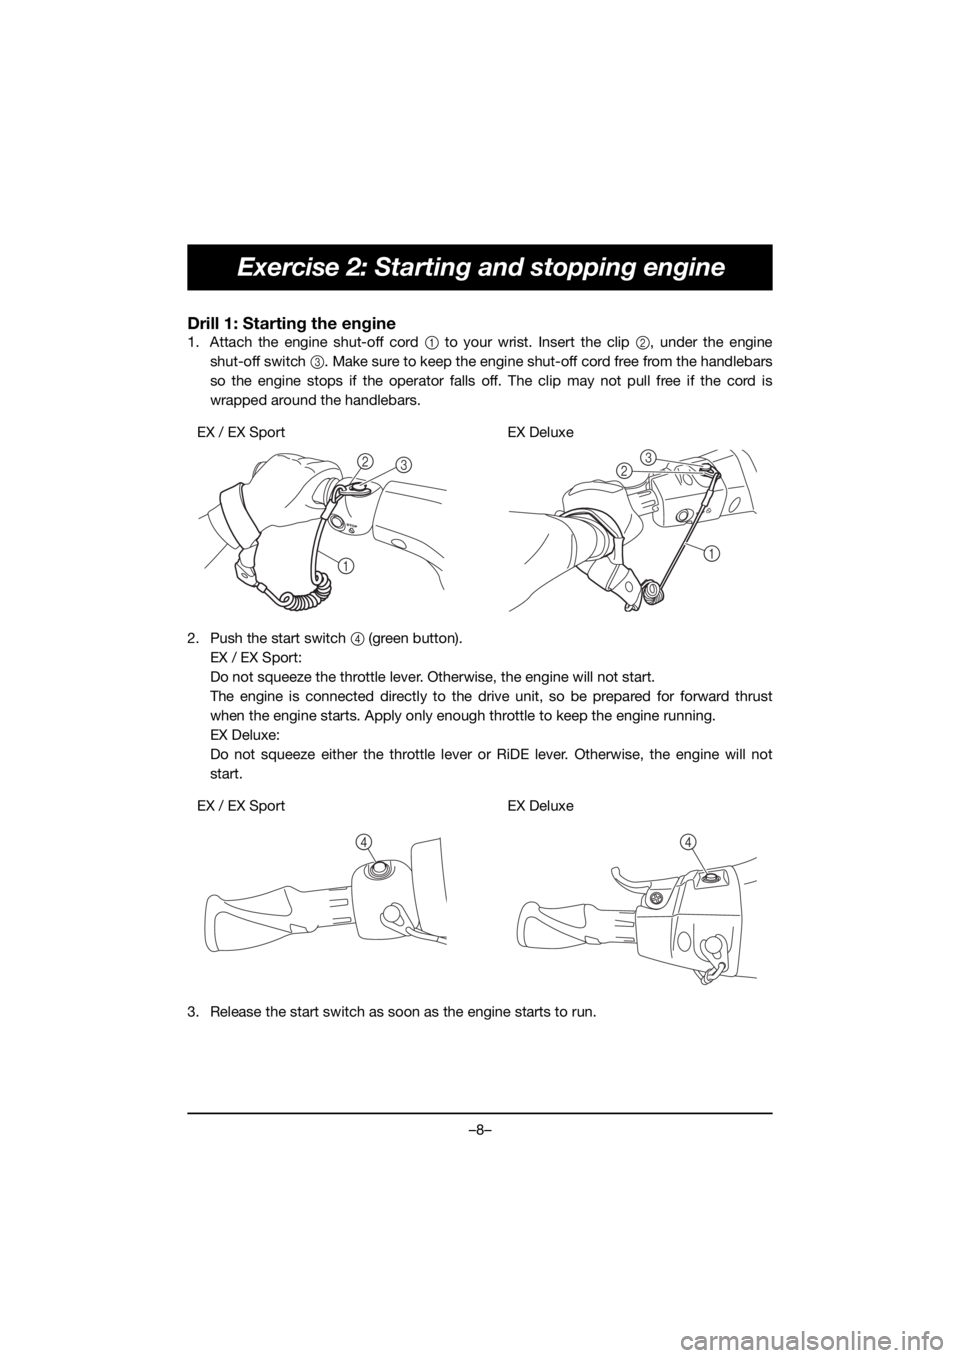 YAMAHA EX SPORT 2020  Notices Demploi (in French) –8–
Exercise 2: Starting and stopping engine
Drill 1: Starting the engine
1. Attach the engine shut-off cord 1 to your wrist. Insert the clip 2, under the engine
shut-off switch 3. Make sure to ke